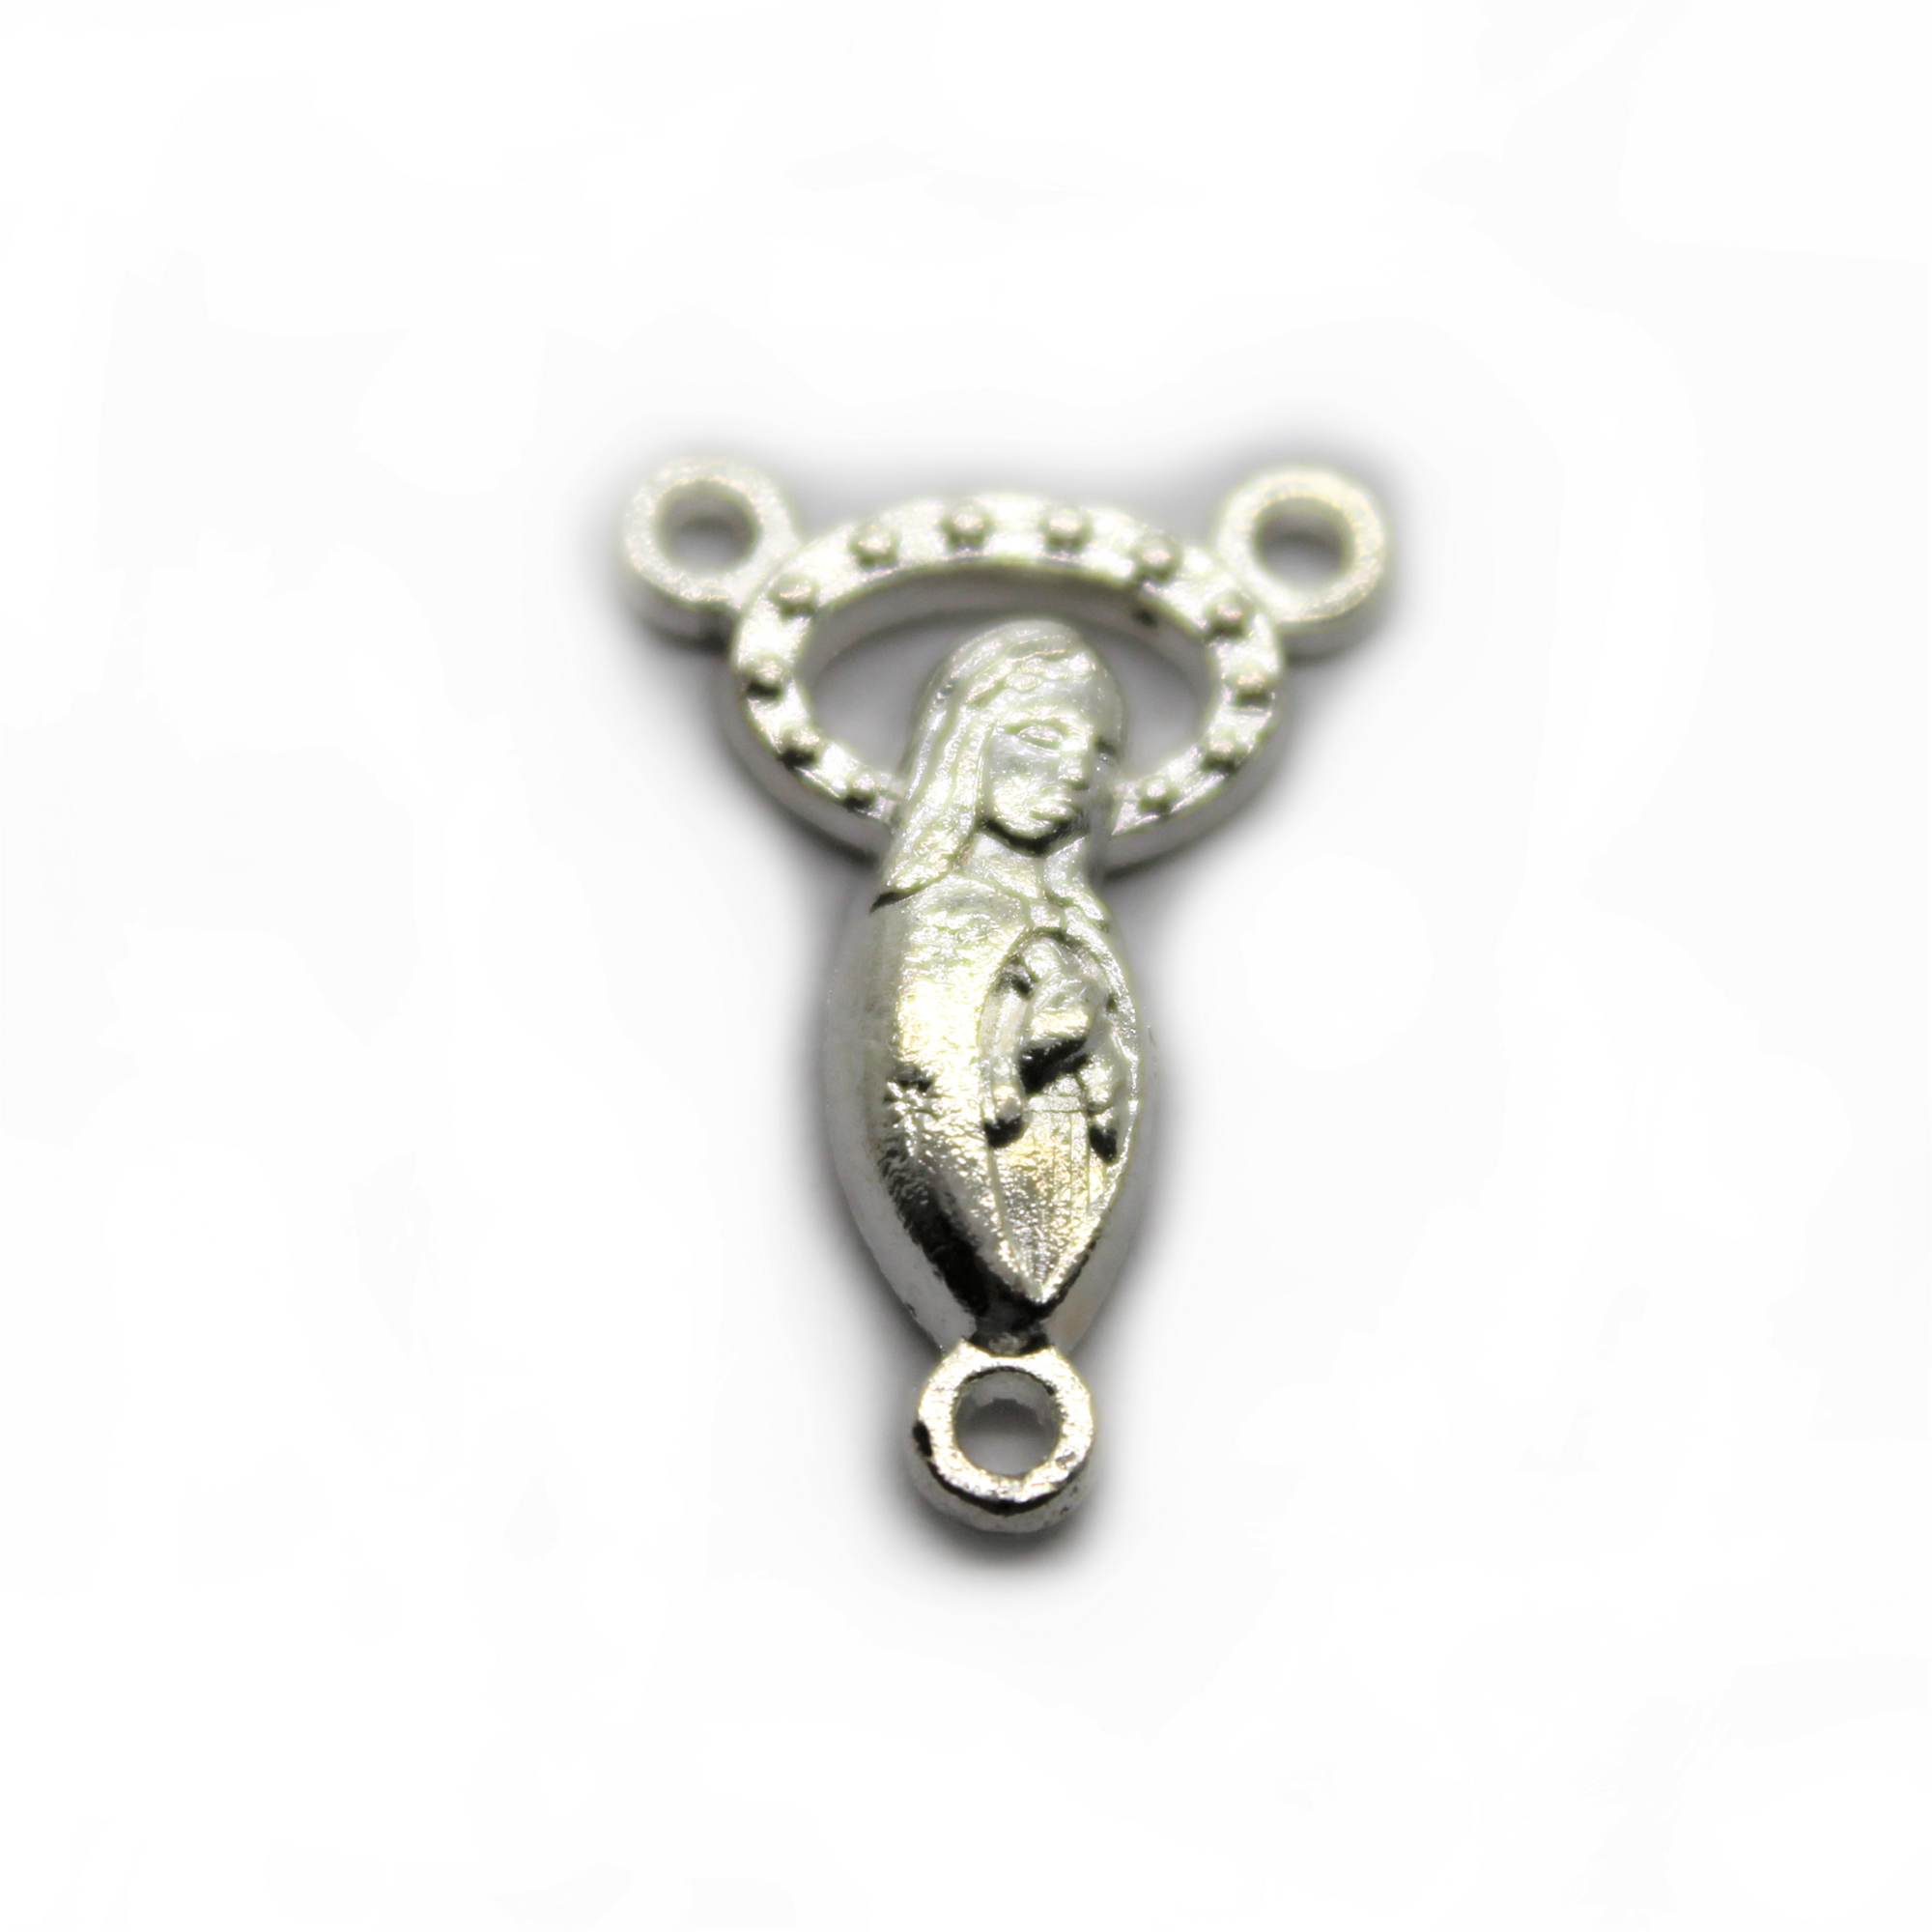 Charm, Mary Rosary Centerpiece, Silver, Alloy, 21mm x 14mm x 2.5mm, Sold Per pkg of 16